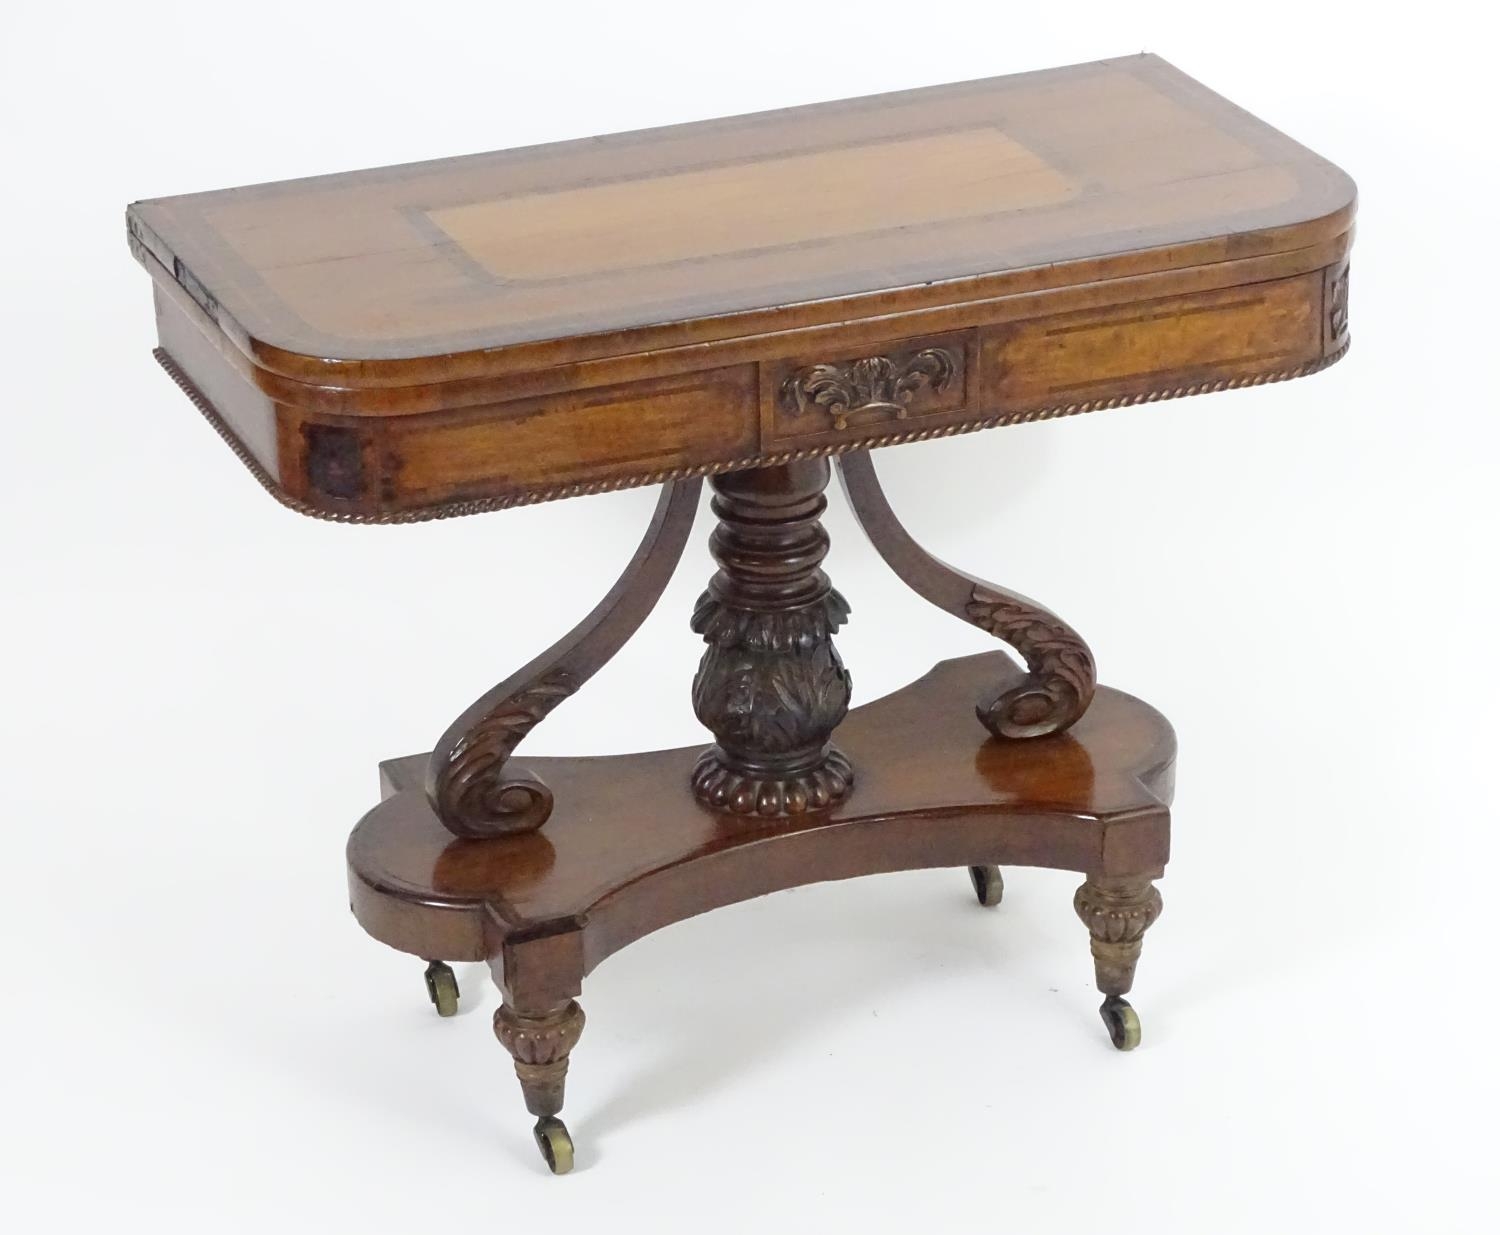 An early / mid 19thc Scottish platform card table with a mahogany and rosewood crossbanded top, - Image 2 of 10